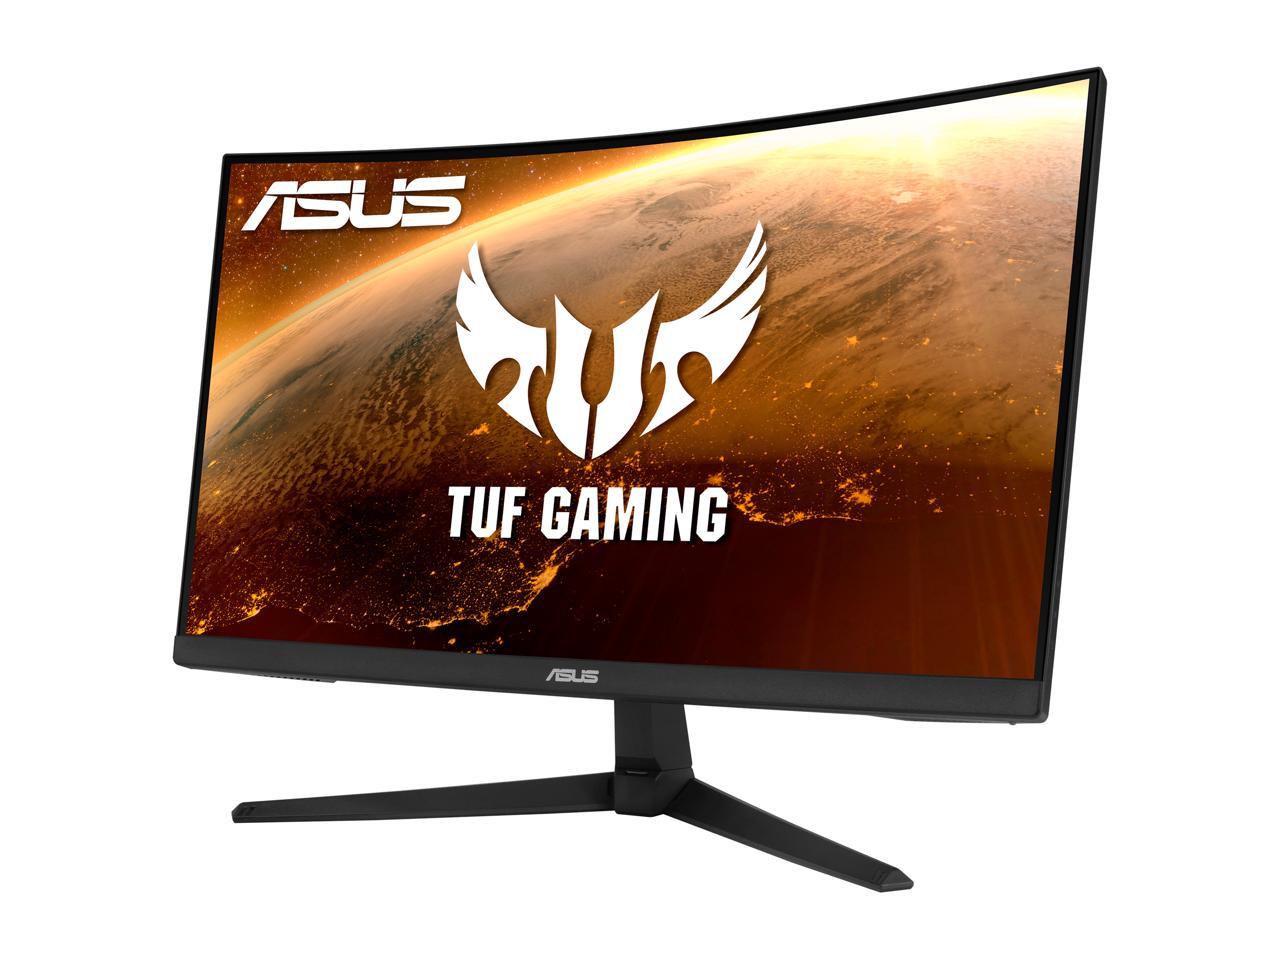 Asus Tuf Gaming Vg24Vq1B 23.8 Inch 3000:1 1Ms Hdmi/Displayport/Earphone Jack Led Non-Glare Curved Gaming Monitor W/ Speakers